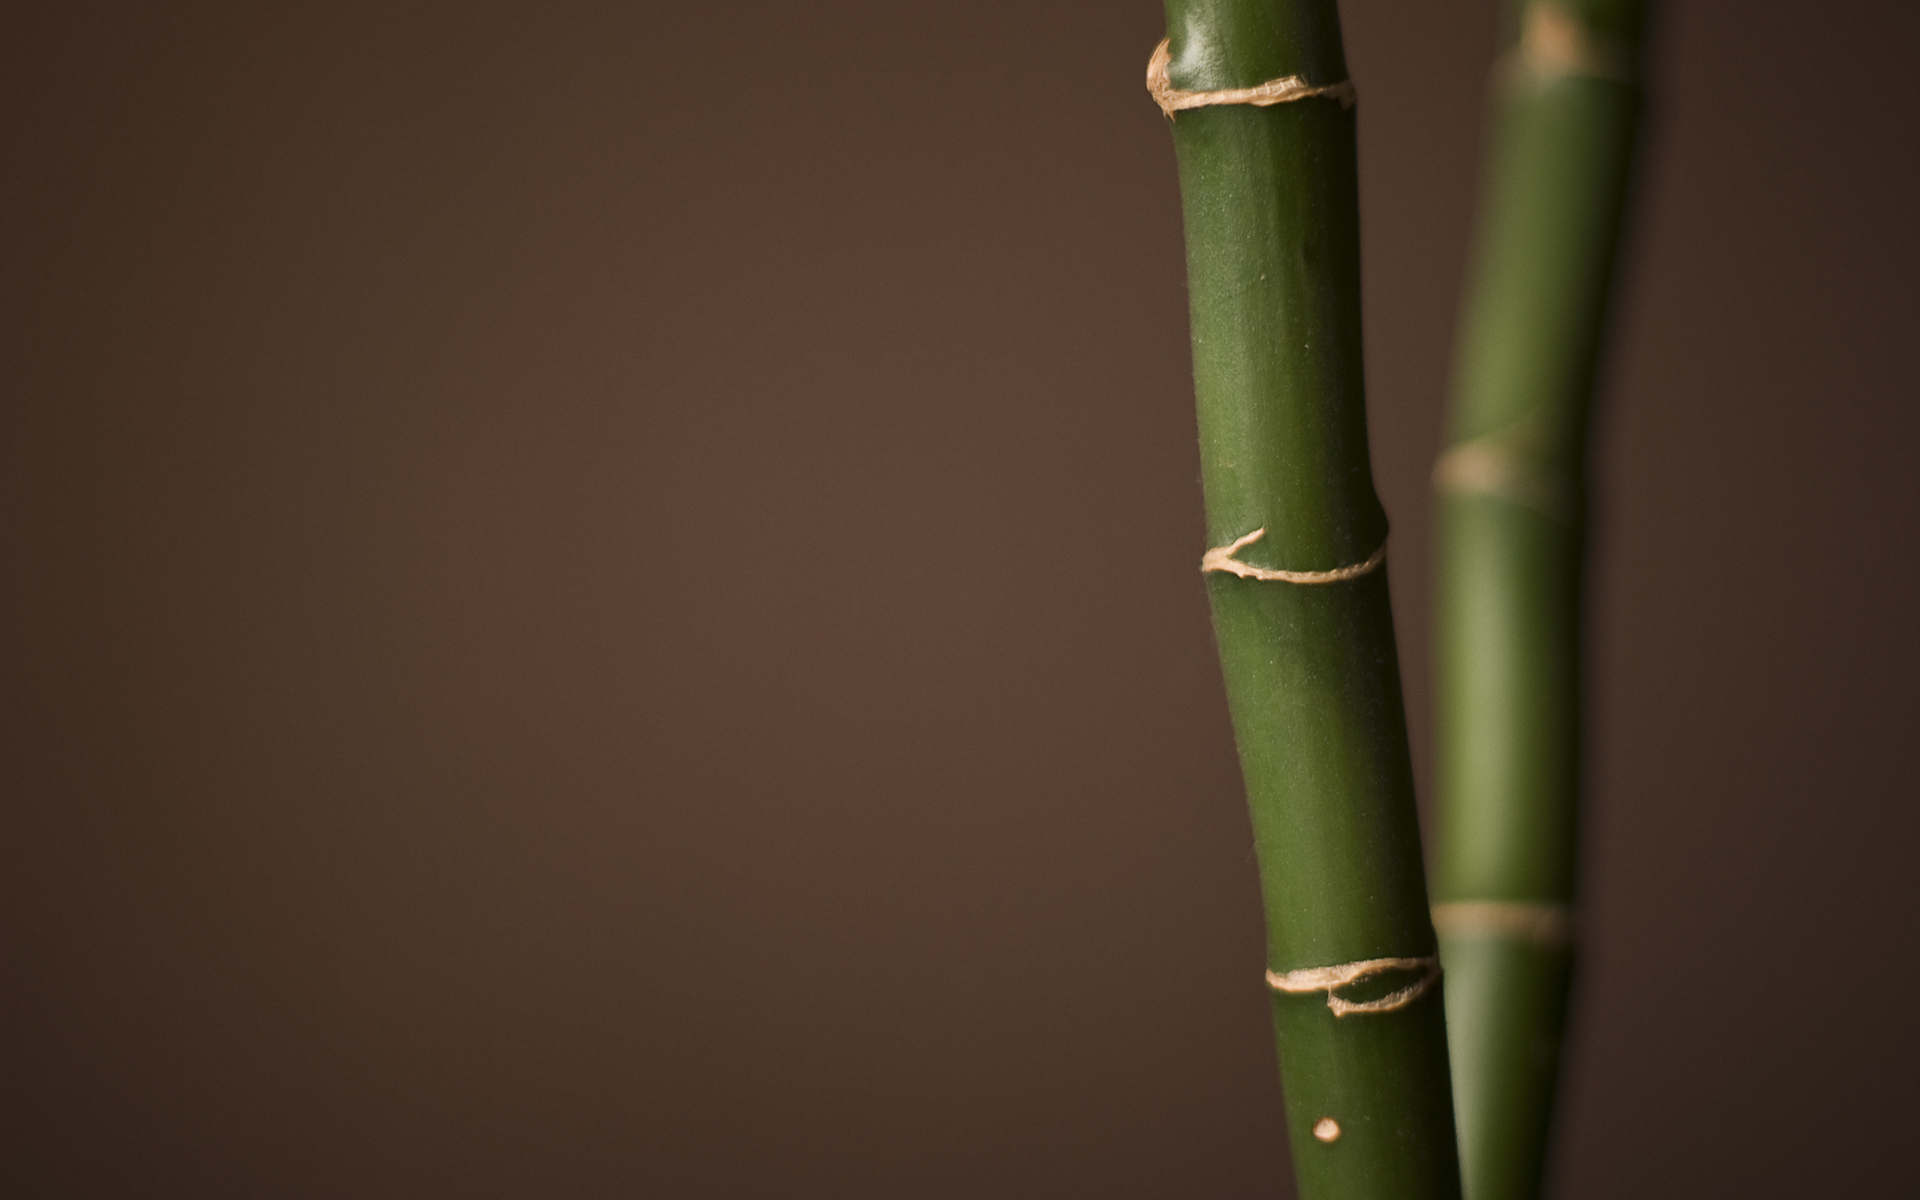 Nature Bamboo HD Wallpaper | Background Image